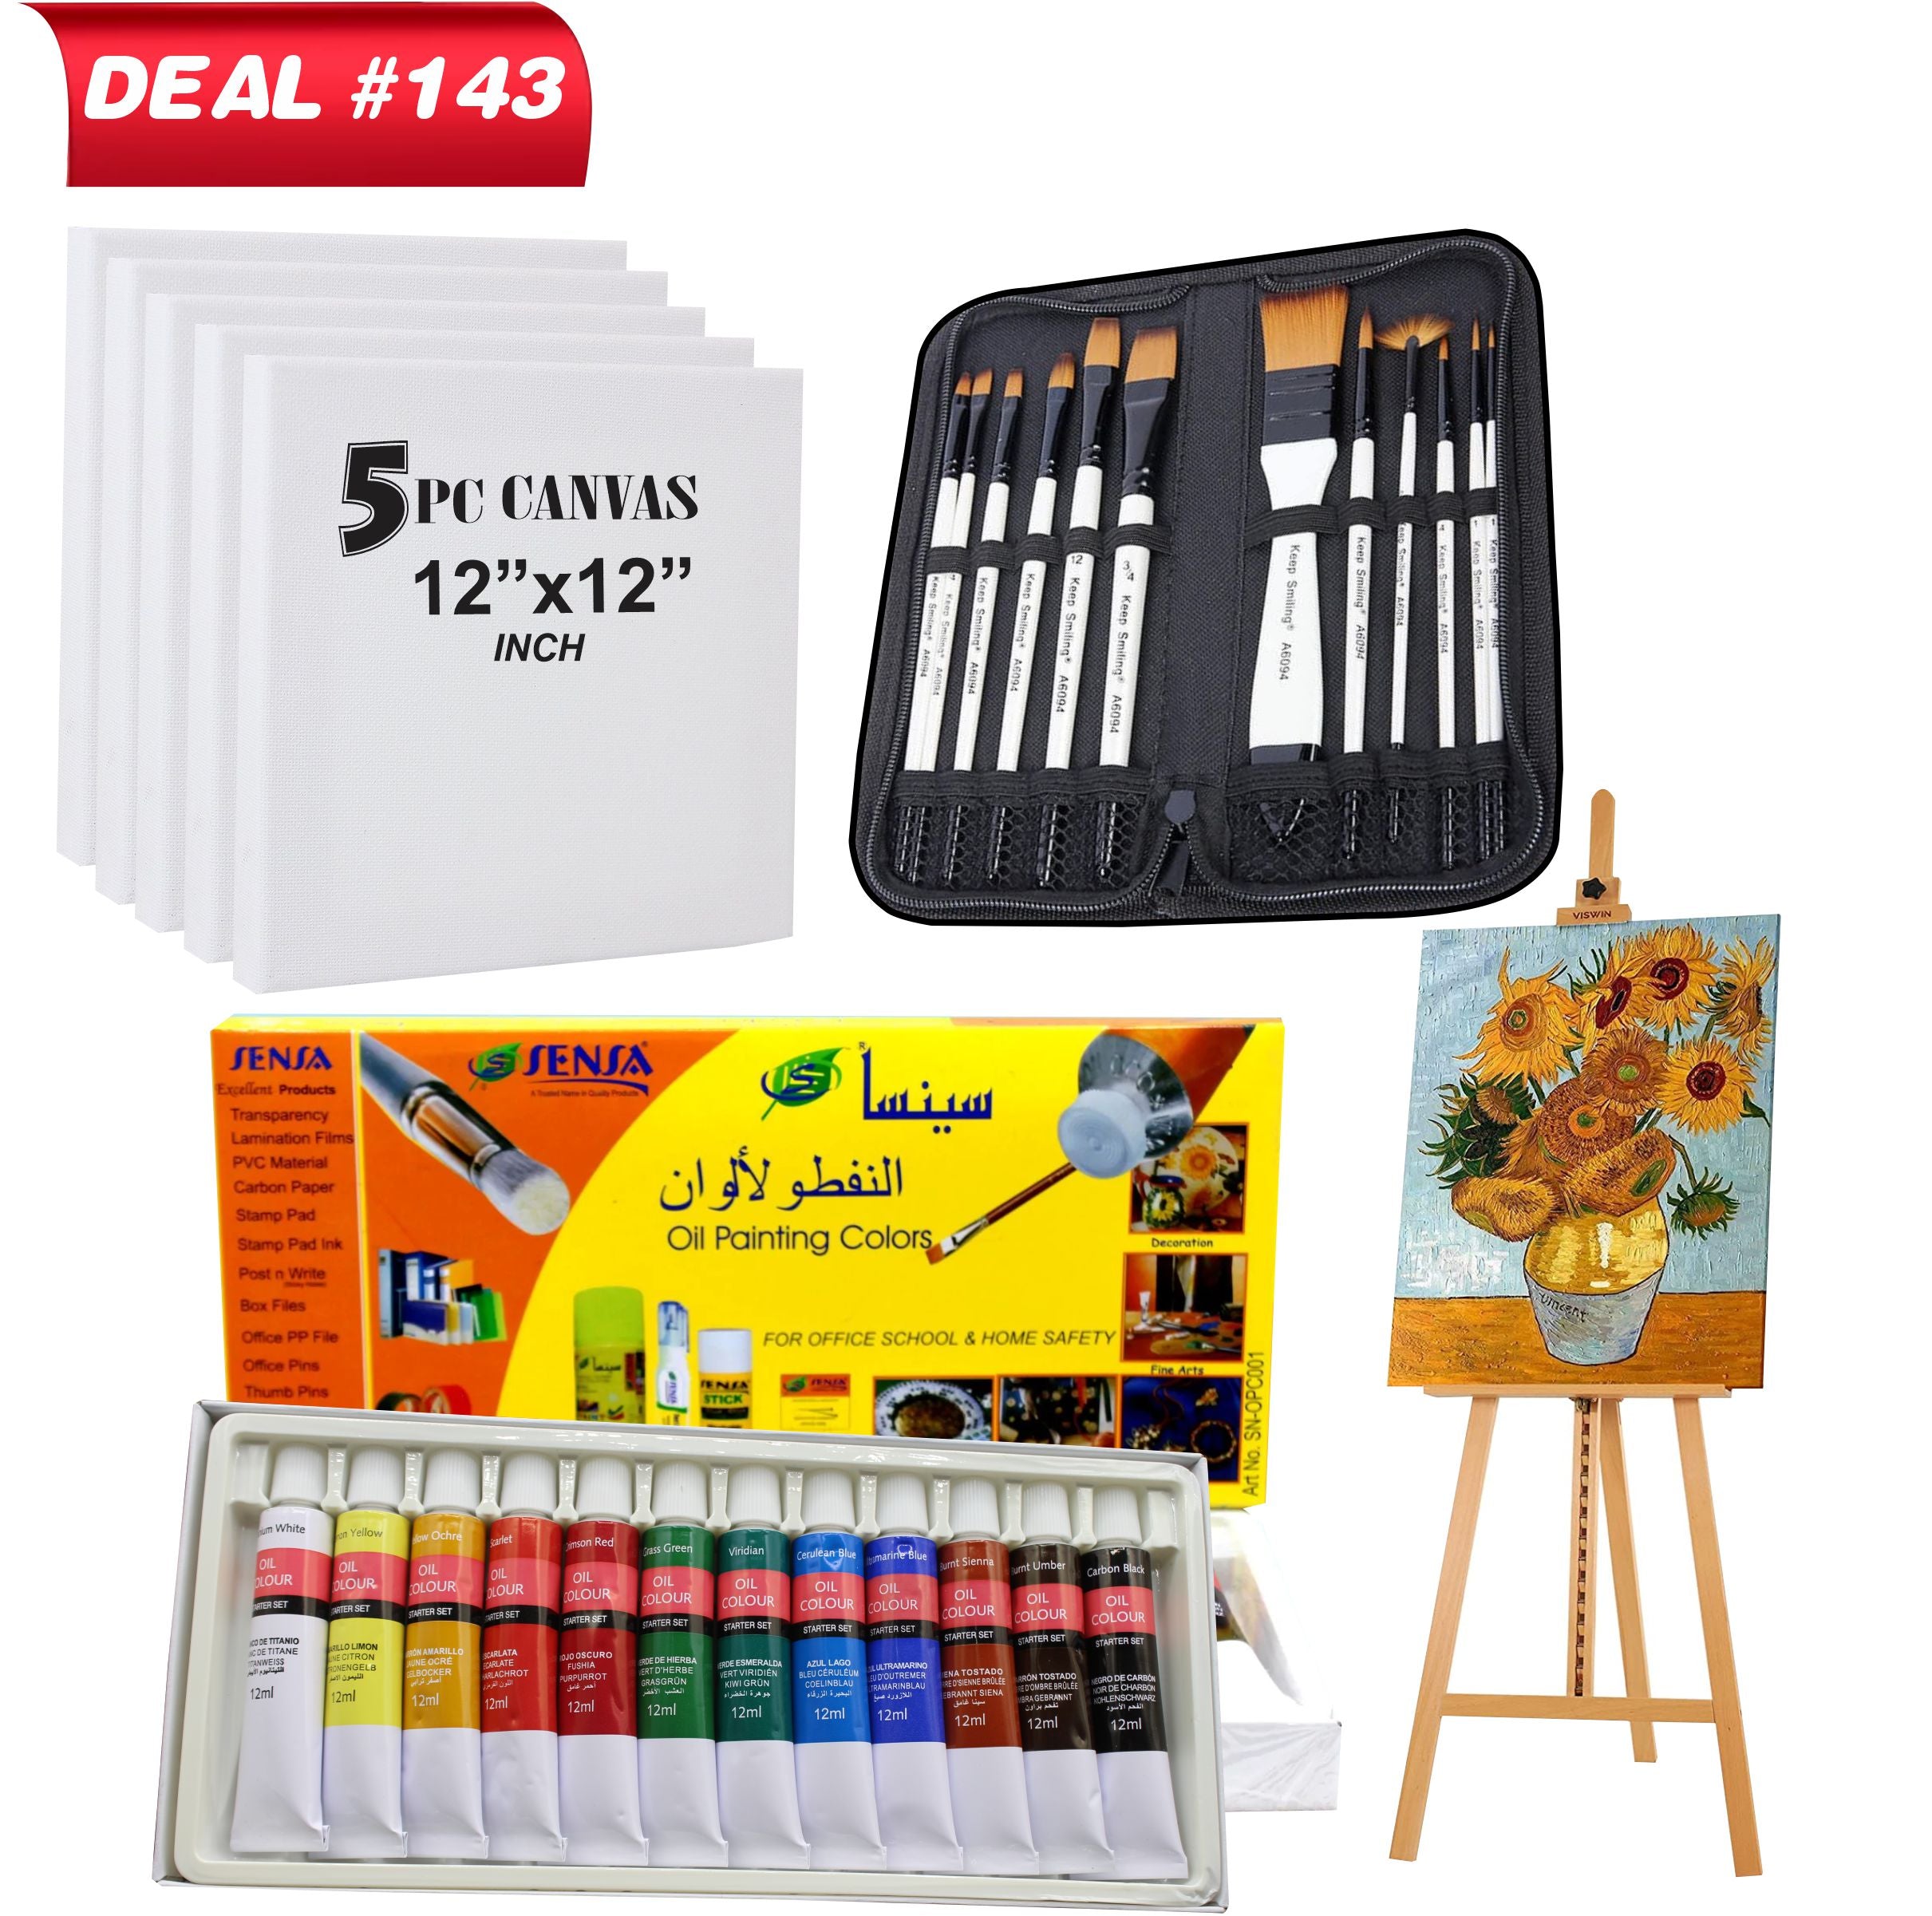 Oil Painting Kit For Artist's, Deal No.143